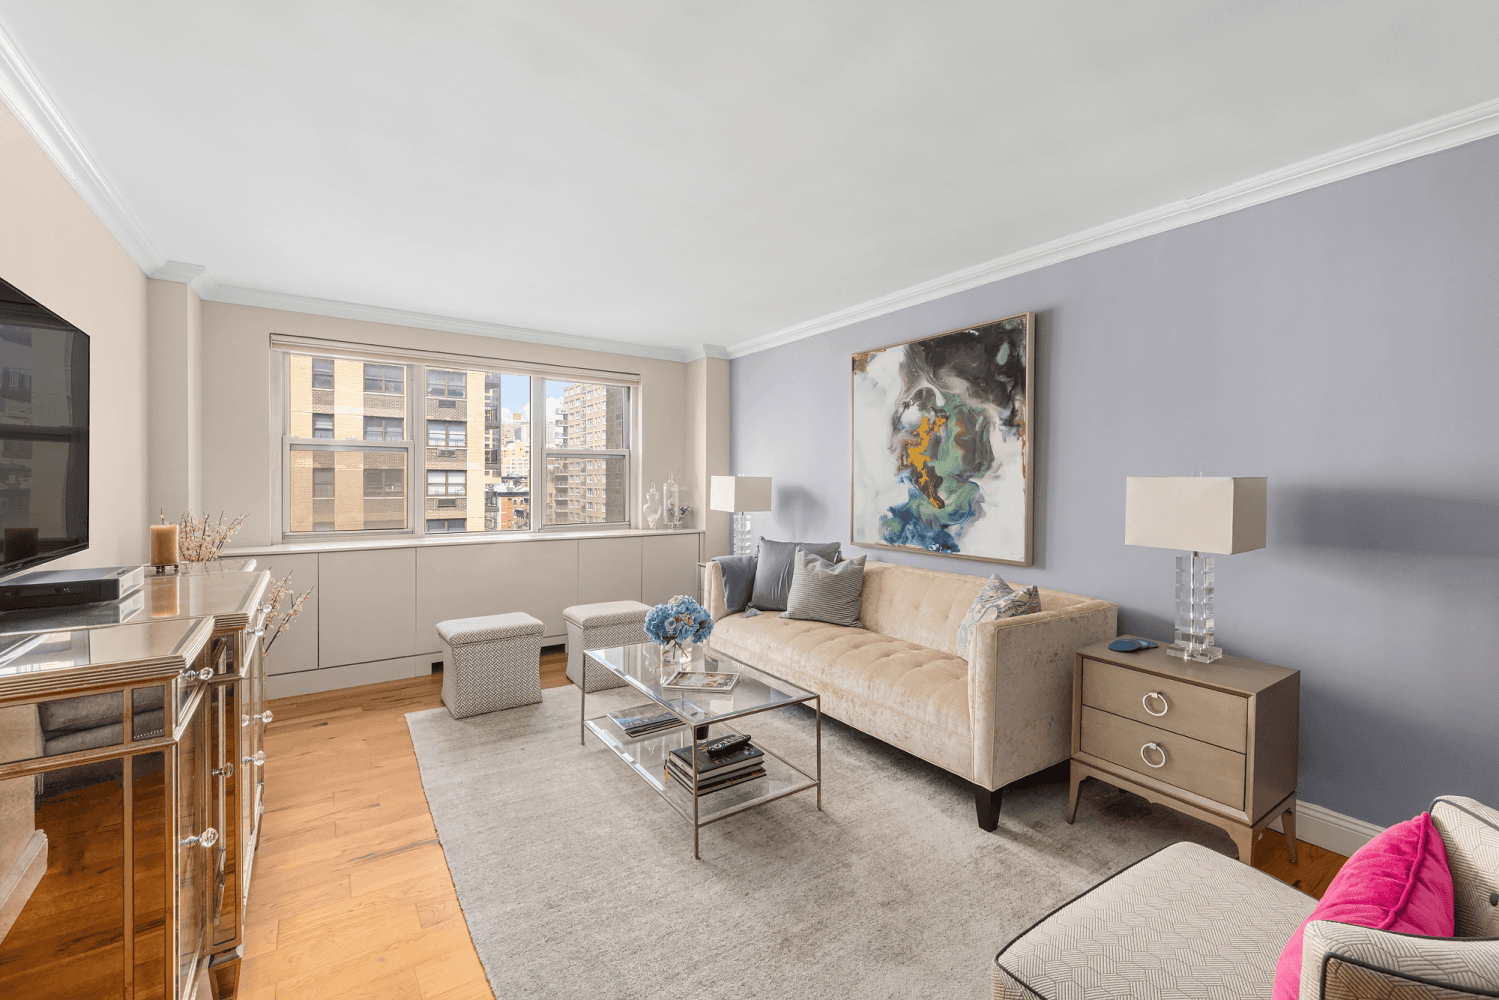 A sun splashed co op in a desirable full service building with on site parking, this lovely 2 bedroom, 2 bathroom home offers an iconic Upper East Side lifestyle close ...